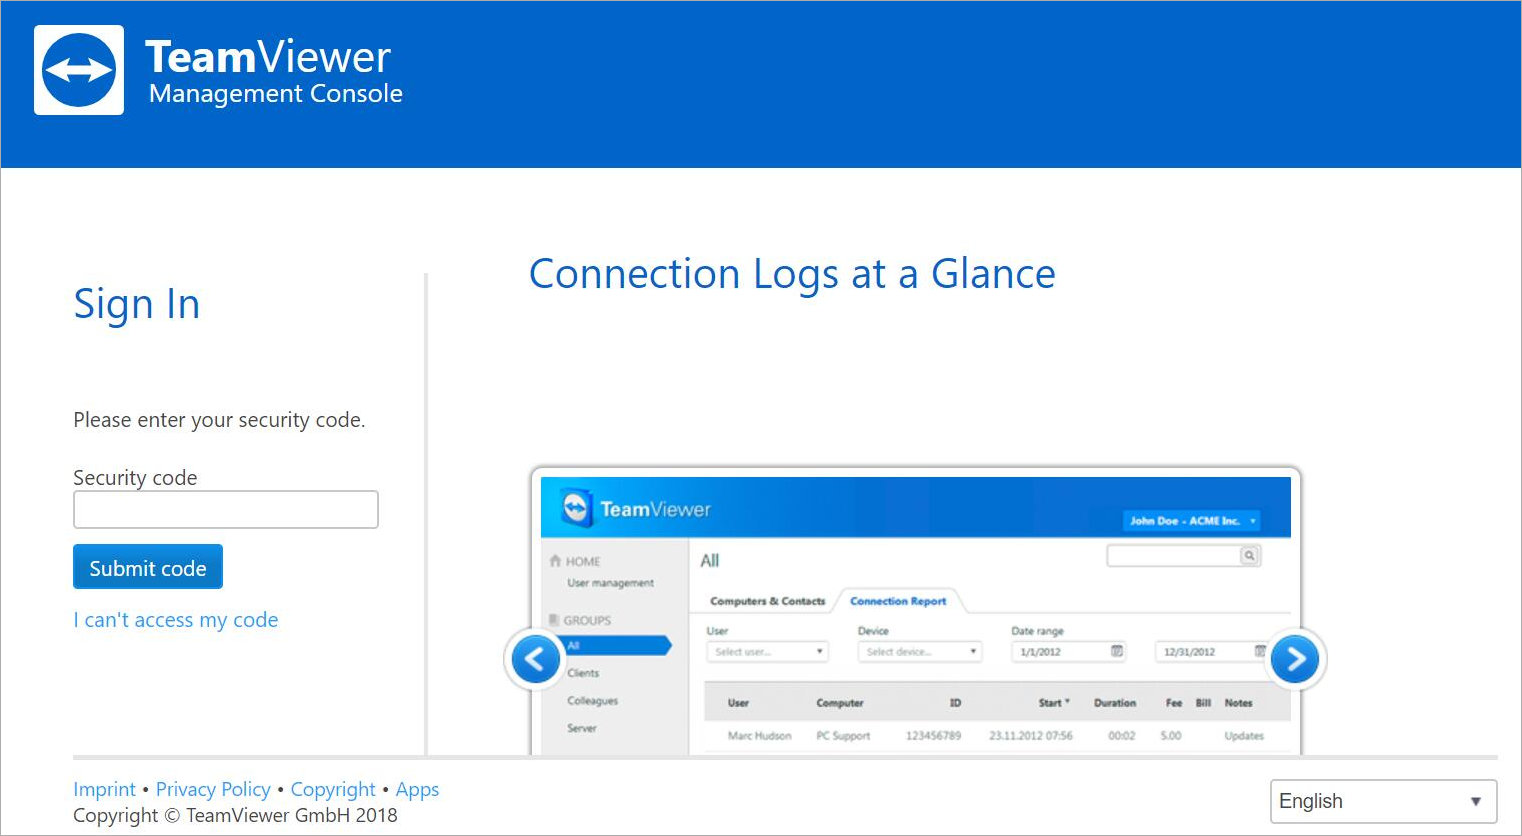 Security code text box on the TeamViewer log in window.